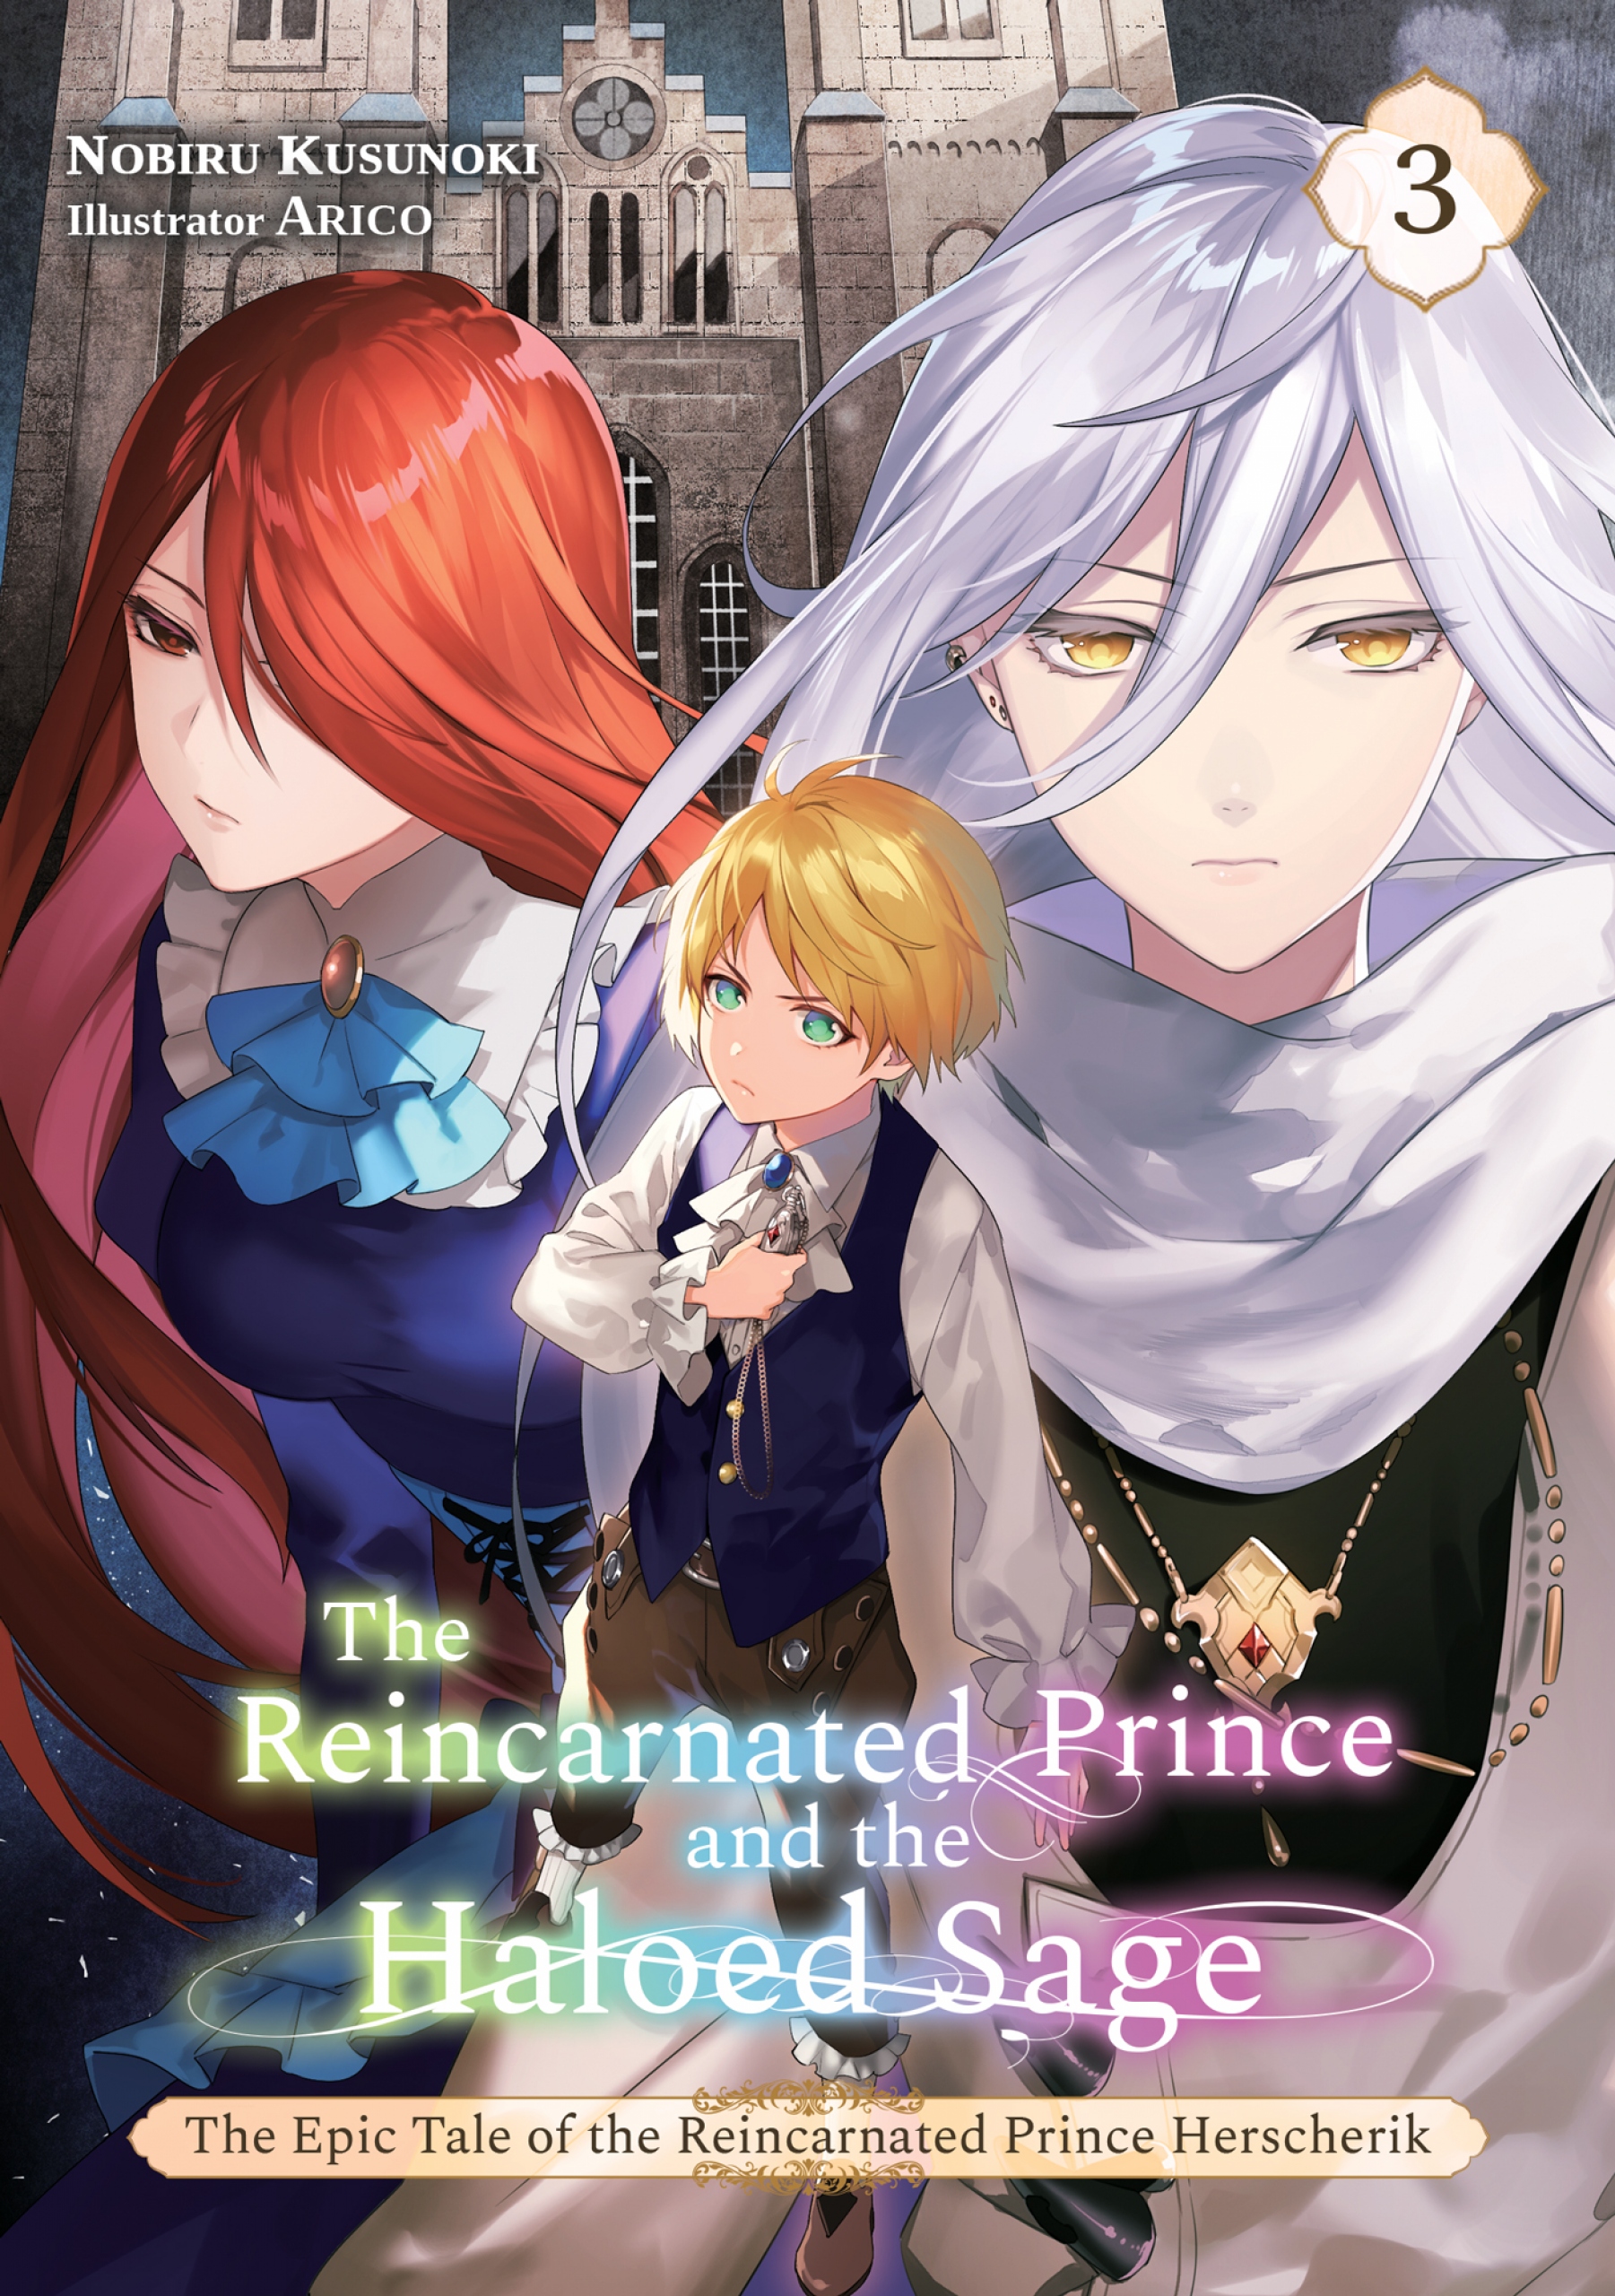 The Reincarnated Prince and the Haloed Sage (Volume 3)